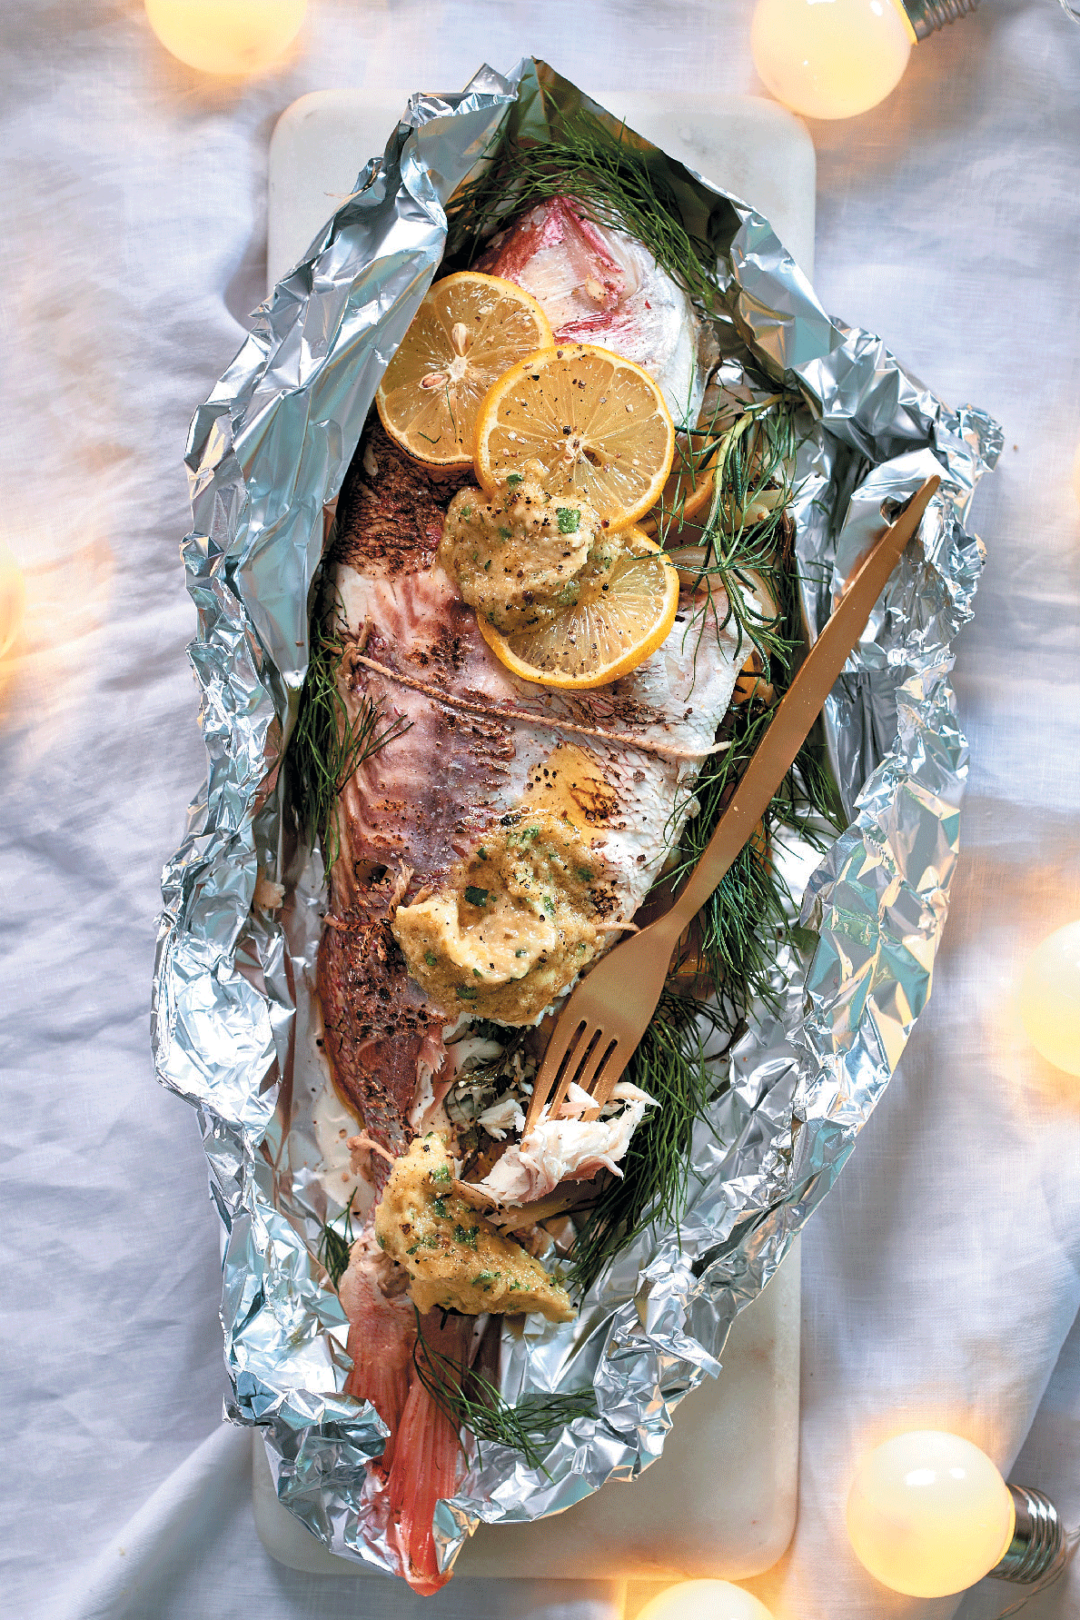 Braaied whole fish with fennel and caper butter